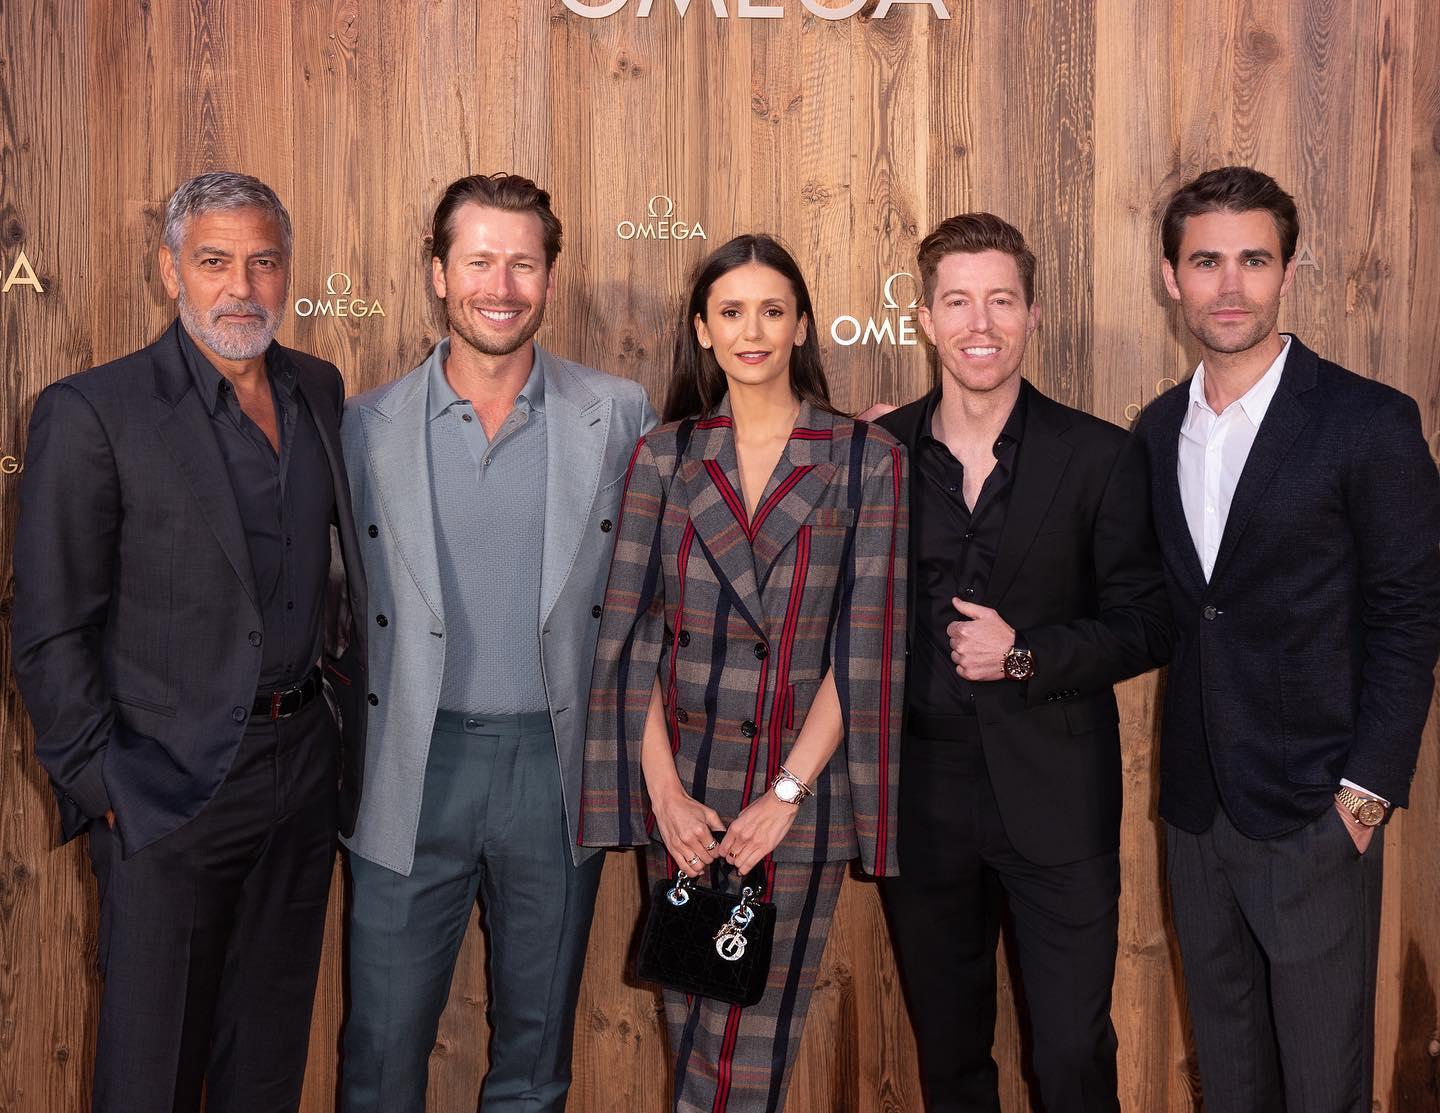 Paul Wesley, Nina Dobrev, George Clooney, Shaun White, and others